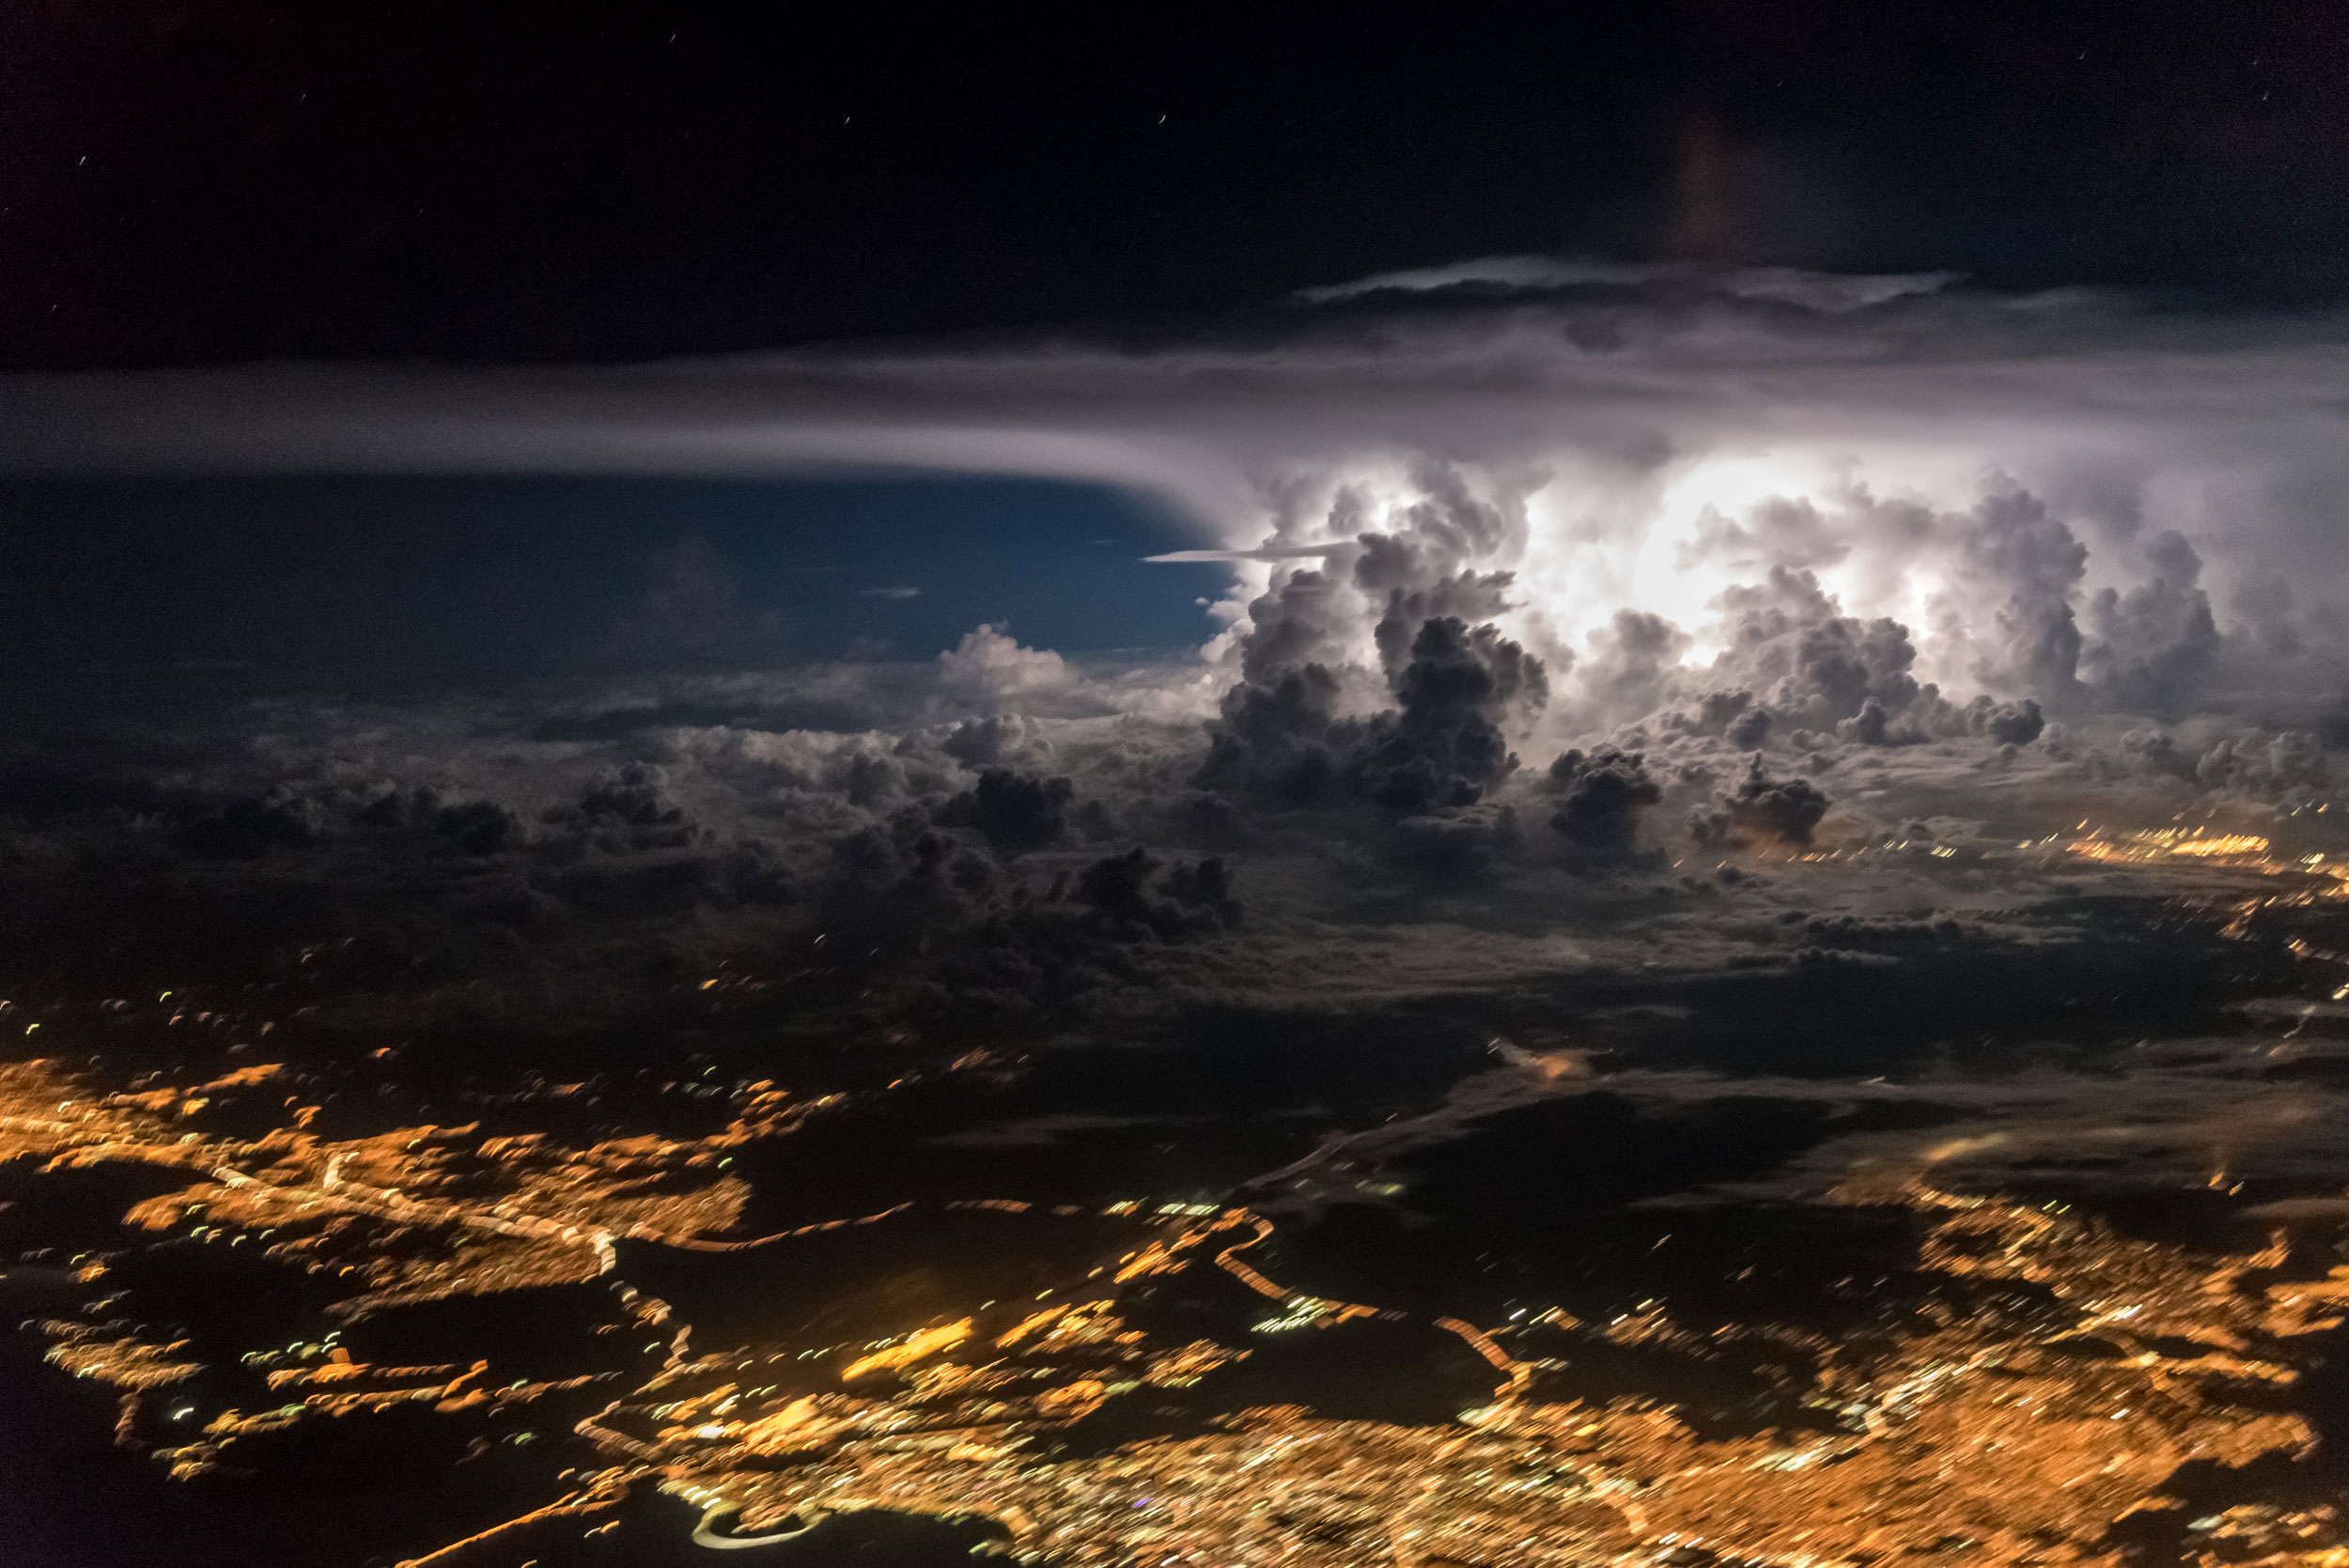 A strong supercell is flashing near the coast of Panama City where both Pacific and Atlantic oceans meet and create the perfect scenario for storms. (Santiago Borja)